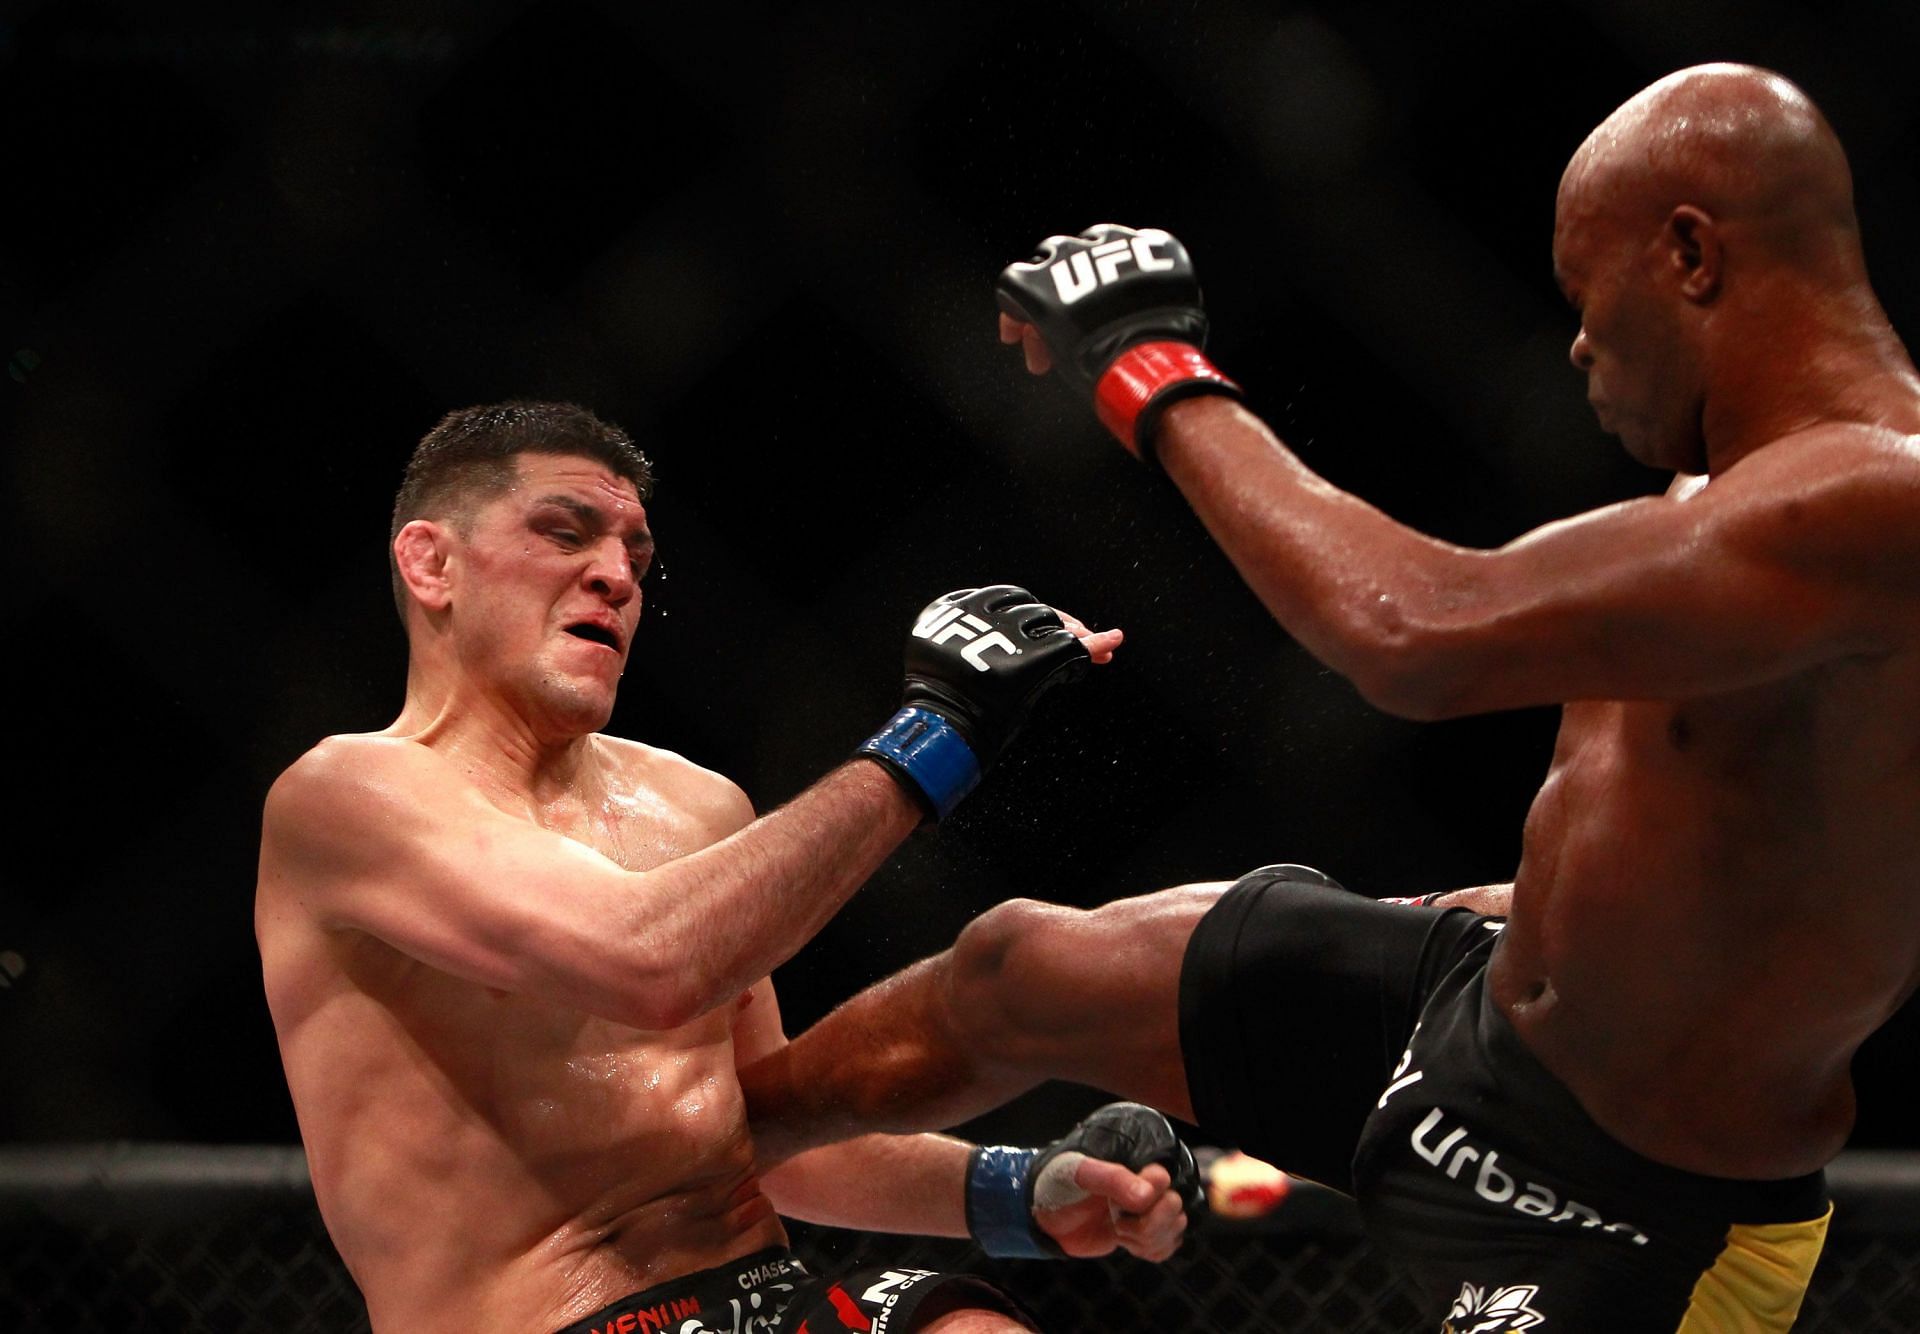 The fight between Silva and Diaz was overturned to a no contest